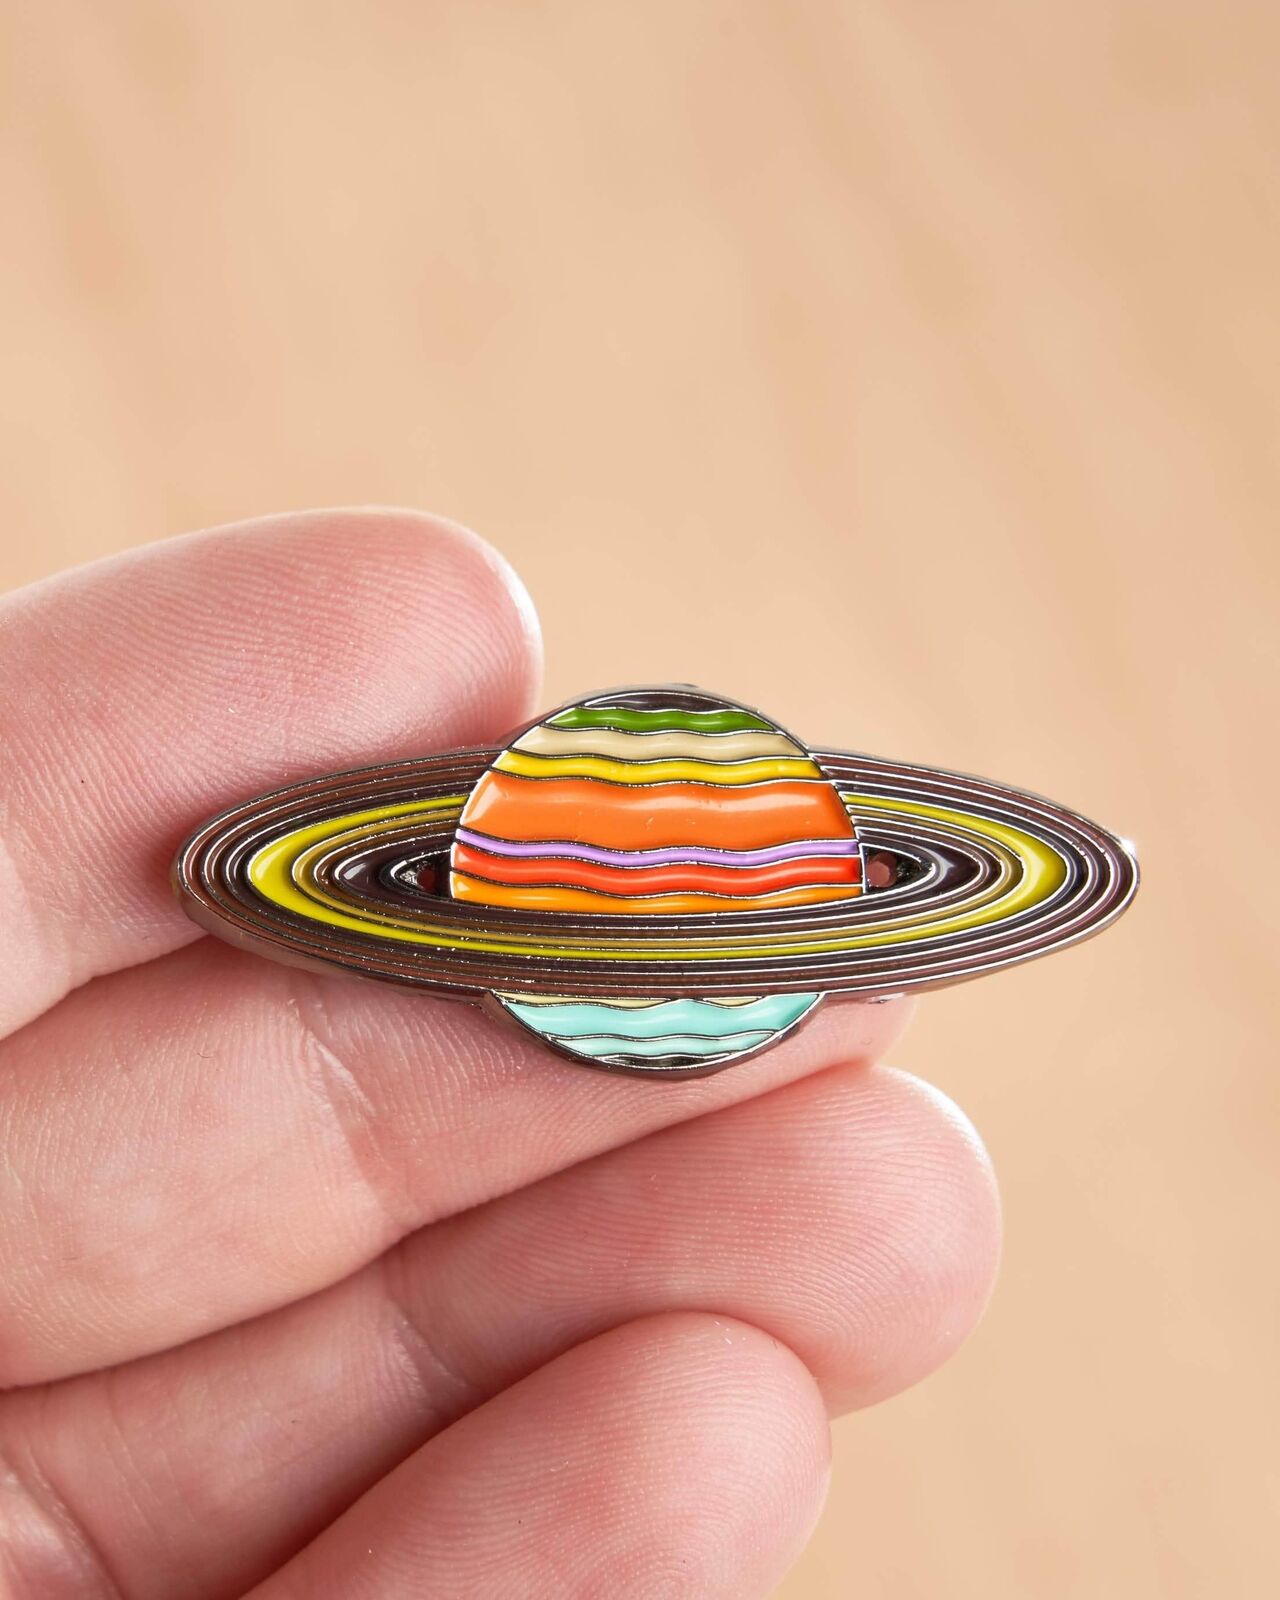 Saturn Planet Enamel Pin for Space Scientists Astronomer